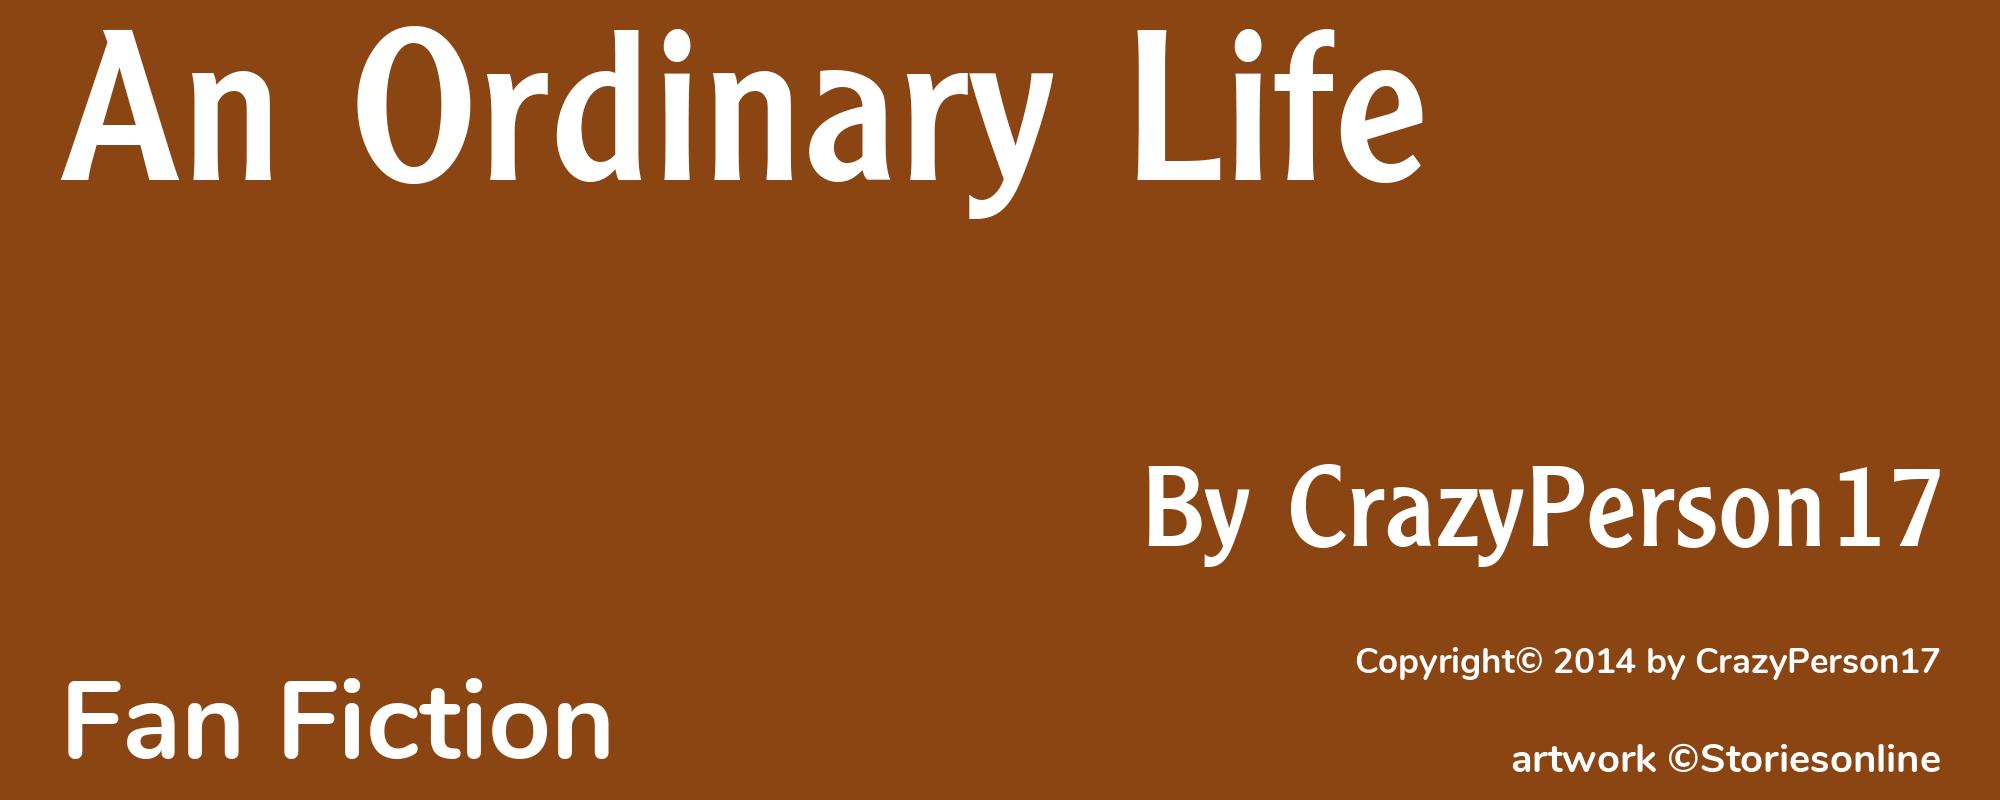 An Ordinary Life - Cover